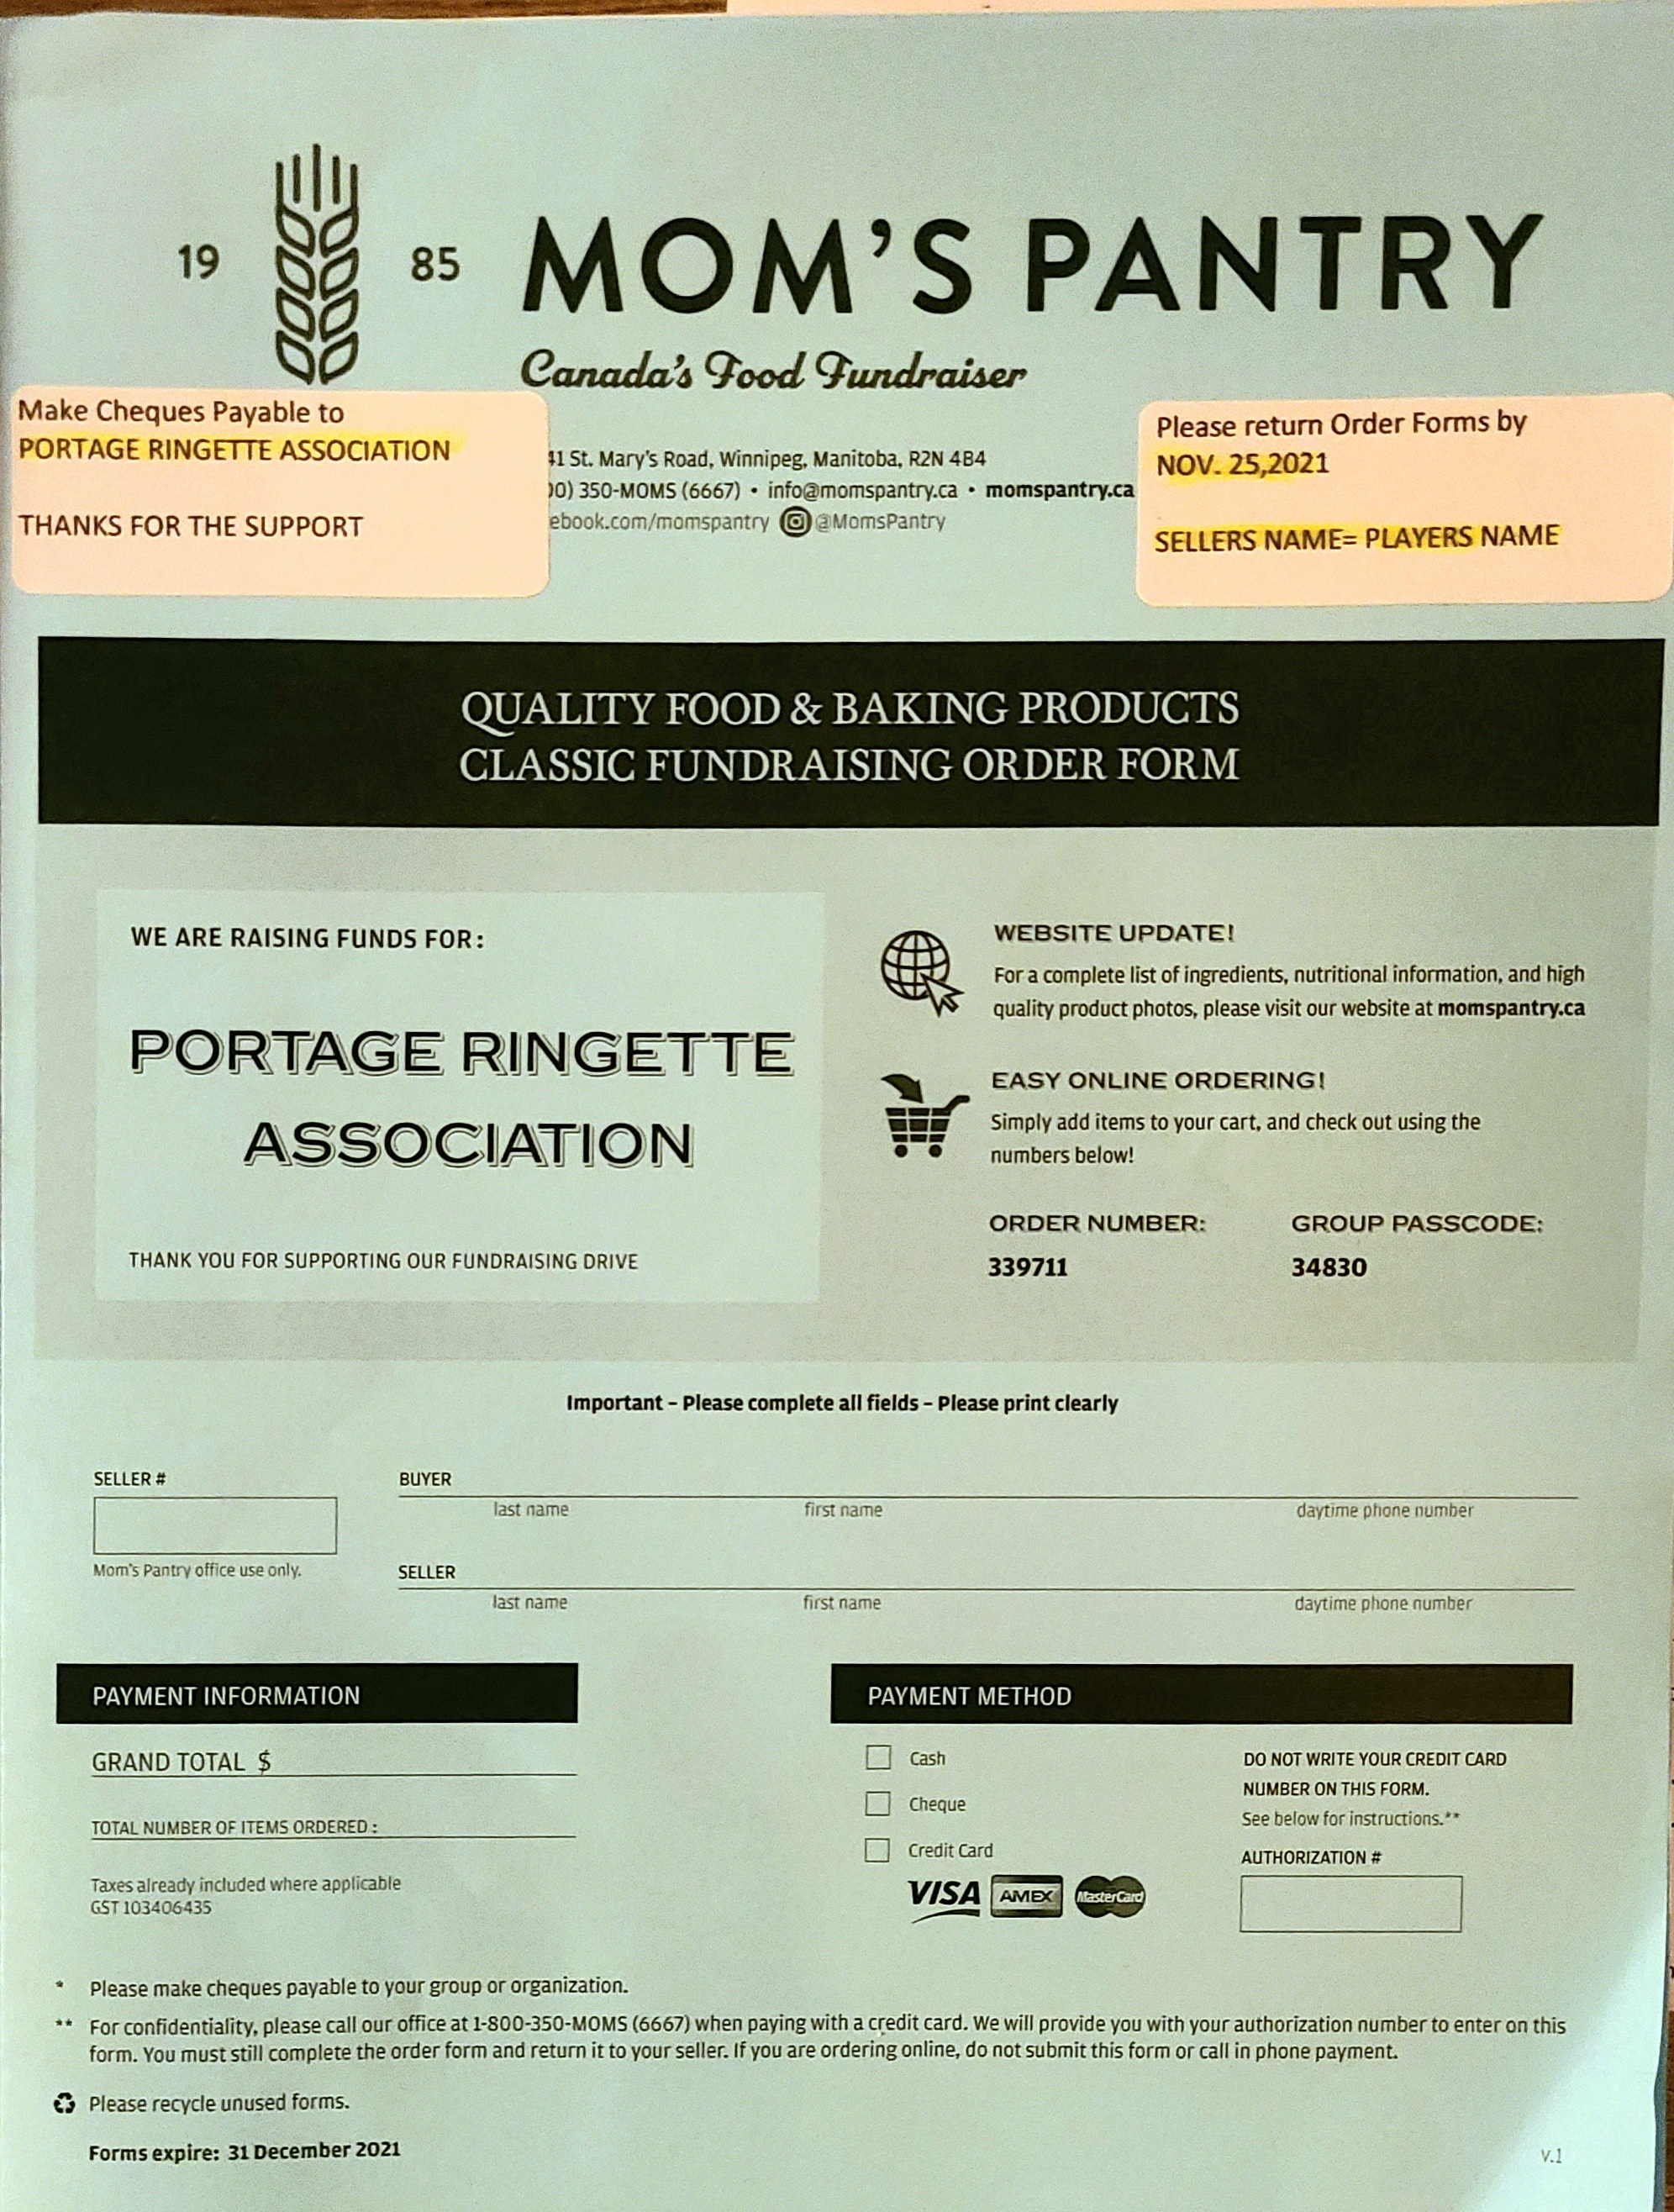 Mom's Pantry Details